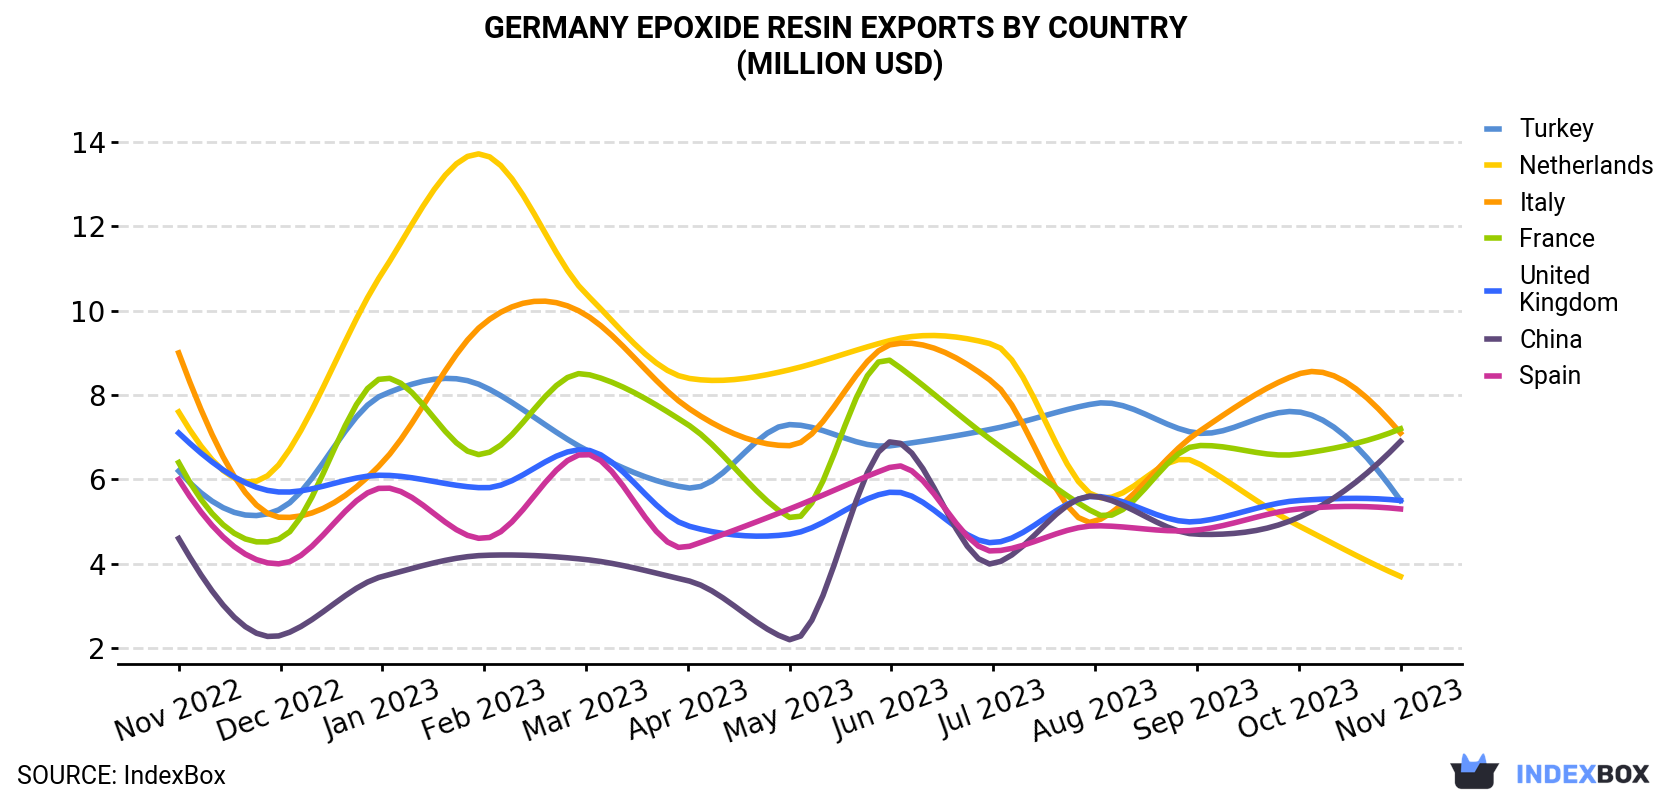 Germany Epoxide Resin Exports By Country (Million USD)